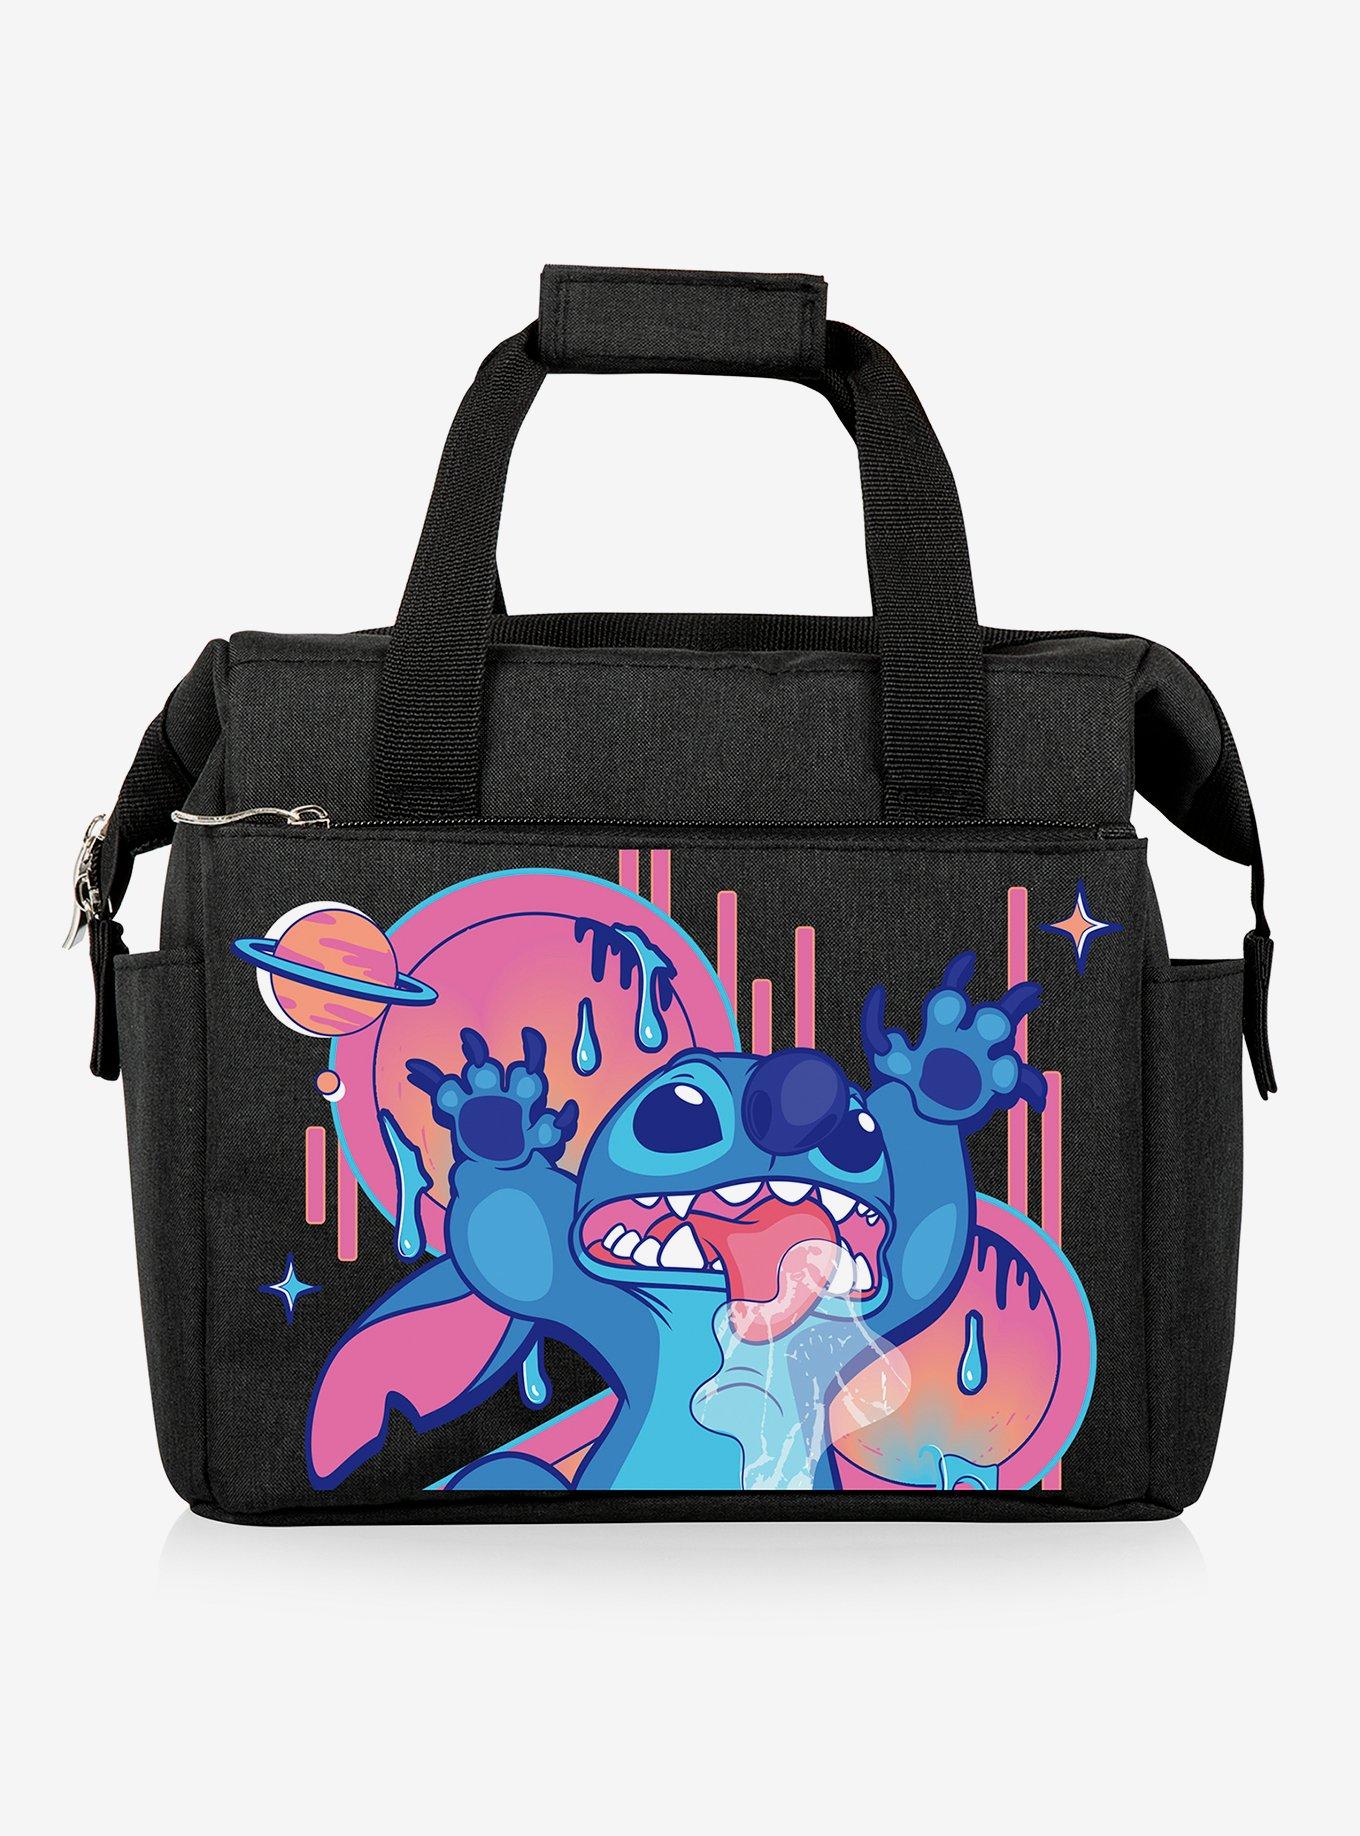 Disney Lilo and Stitch Lunch Cooler Hands Up Black